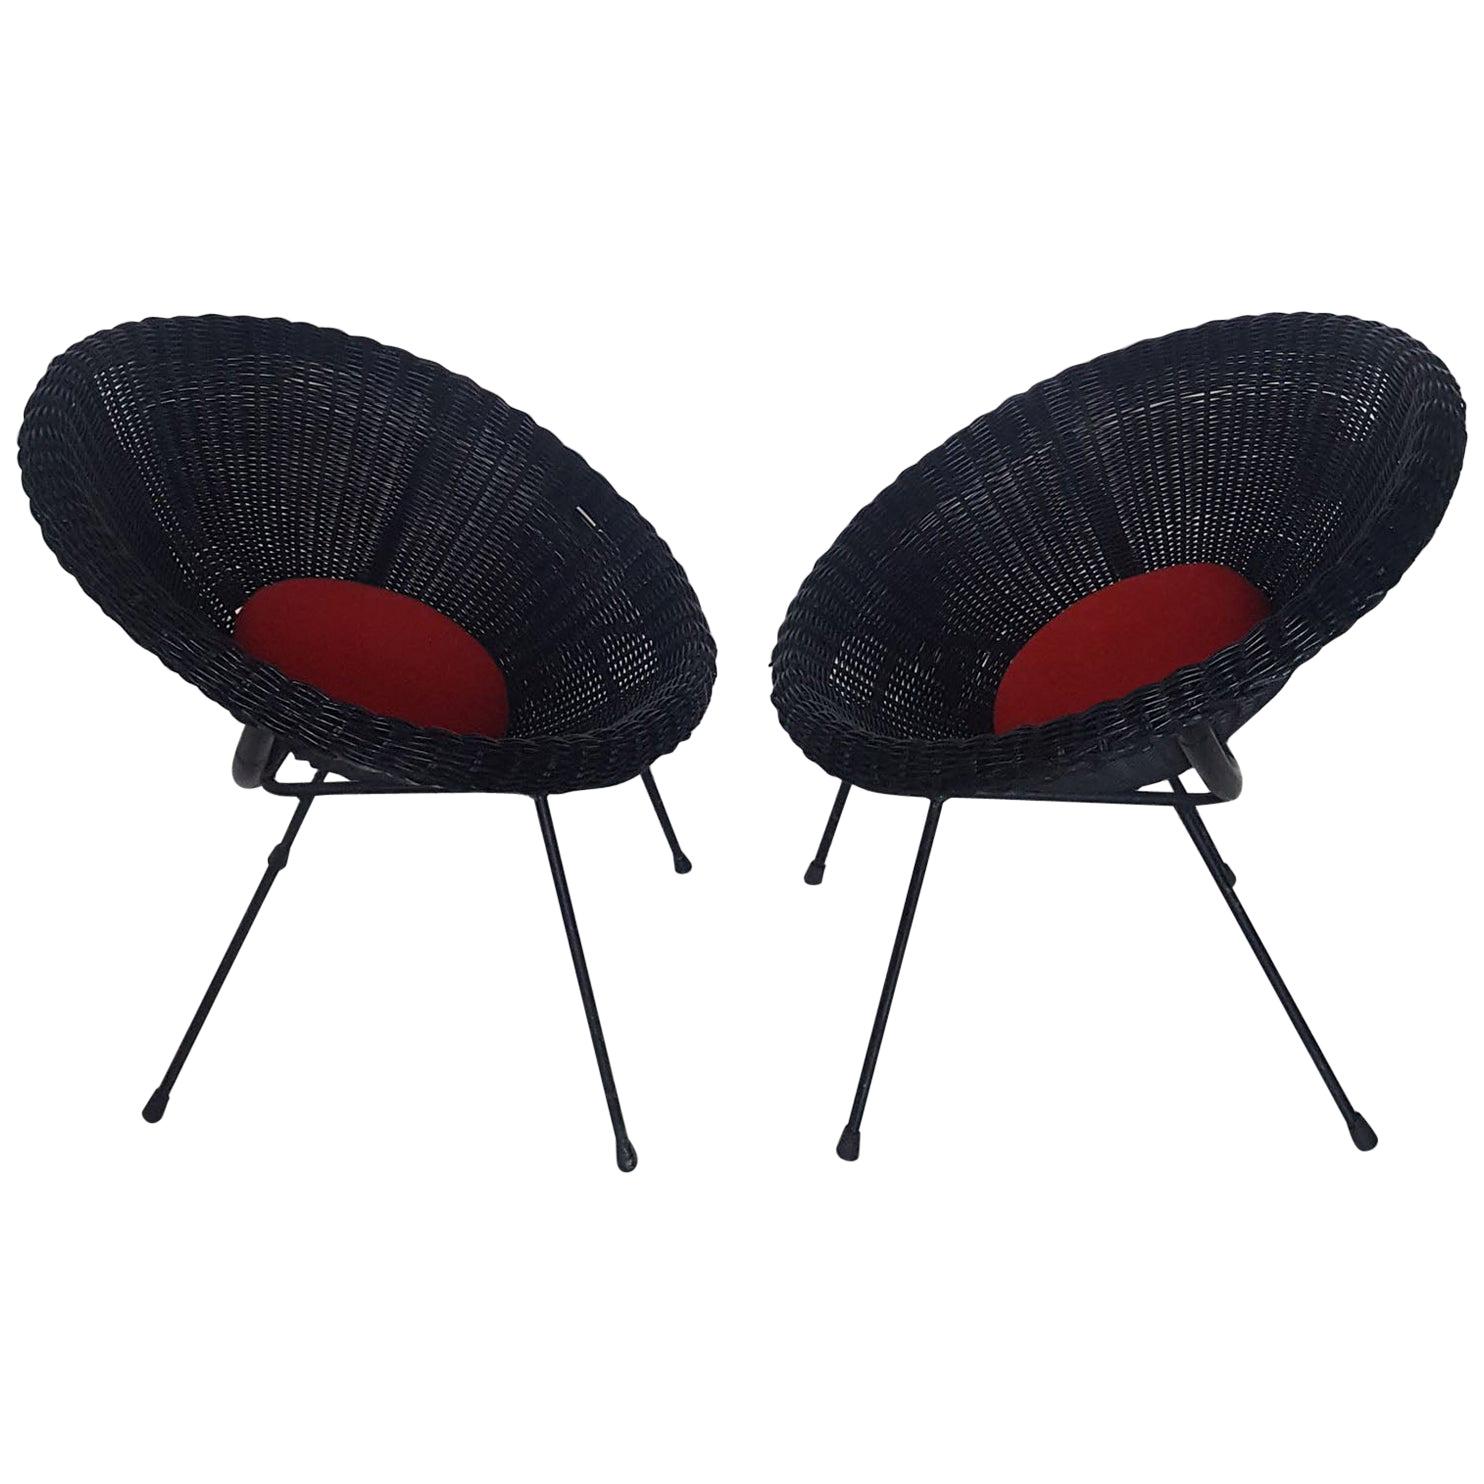 Mid-Century Modern Italian Black Wicker Round Armchairs, Made in Milano, 1950s For Sale